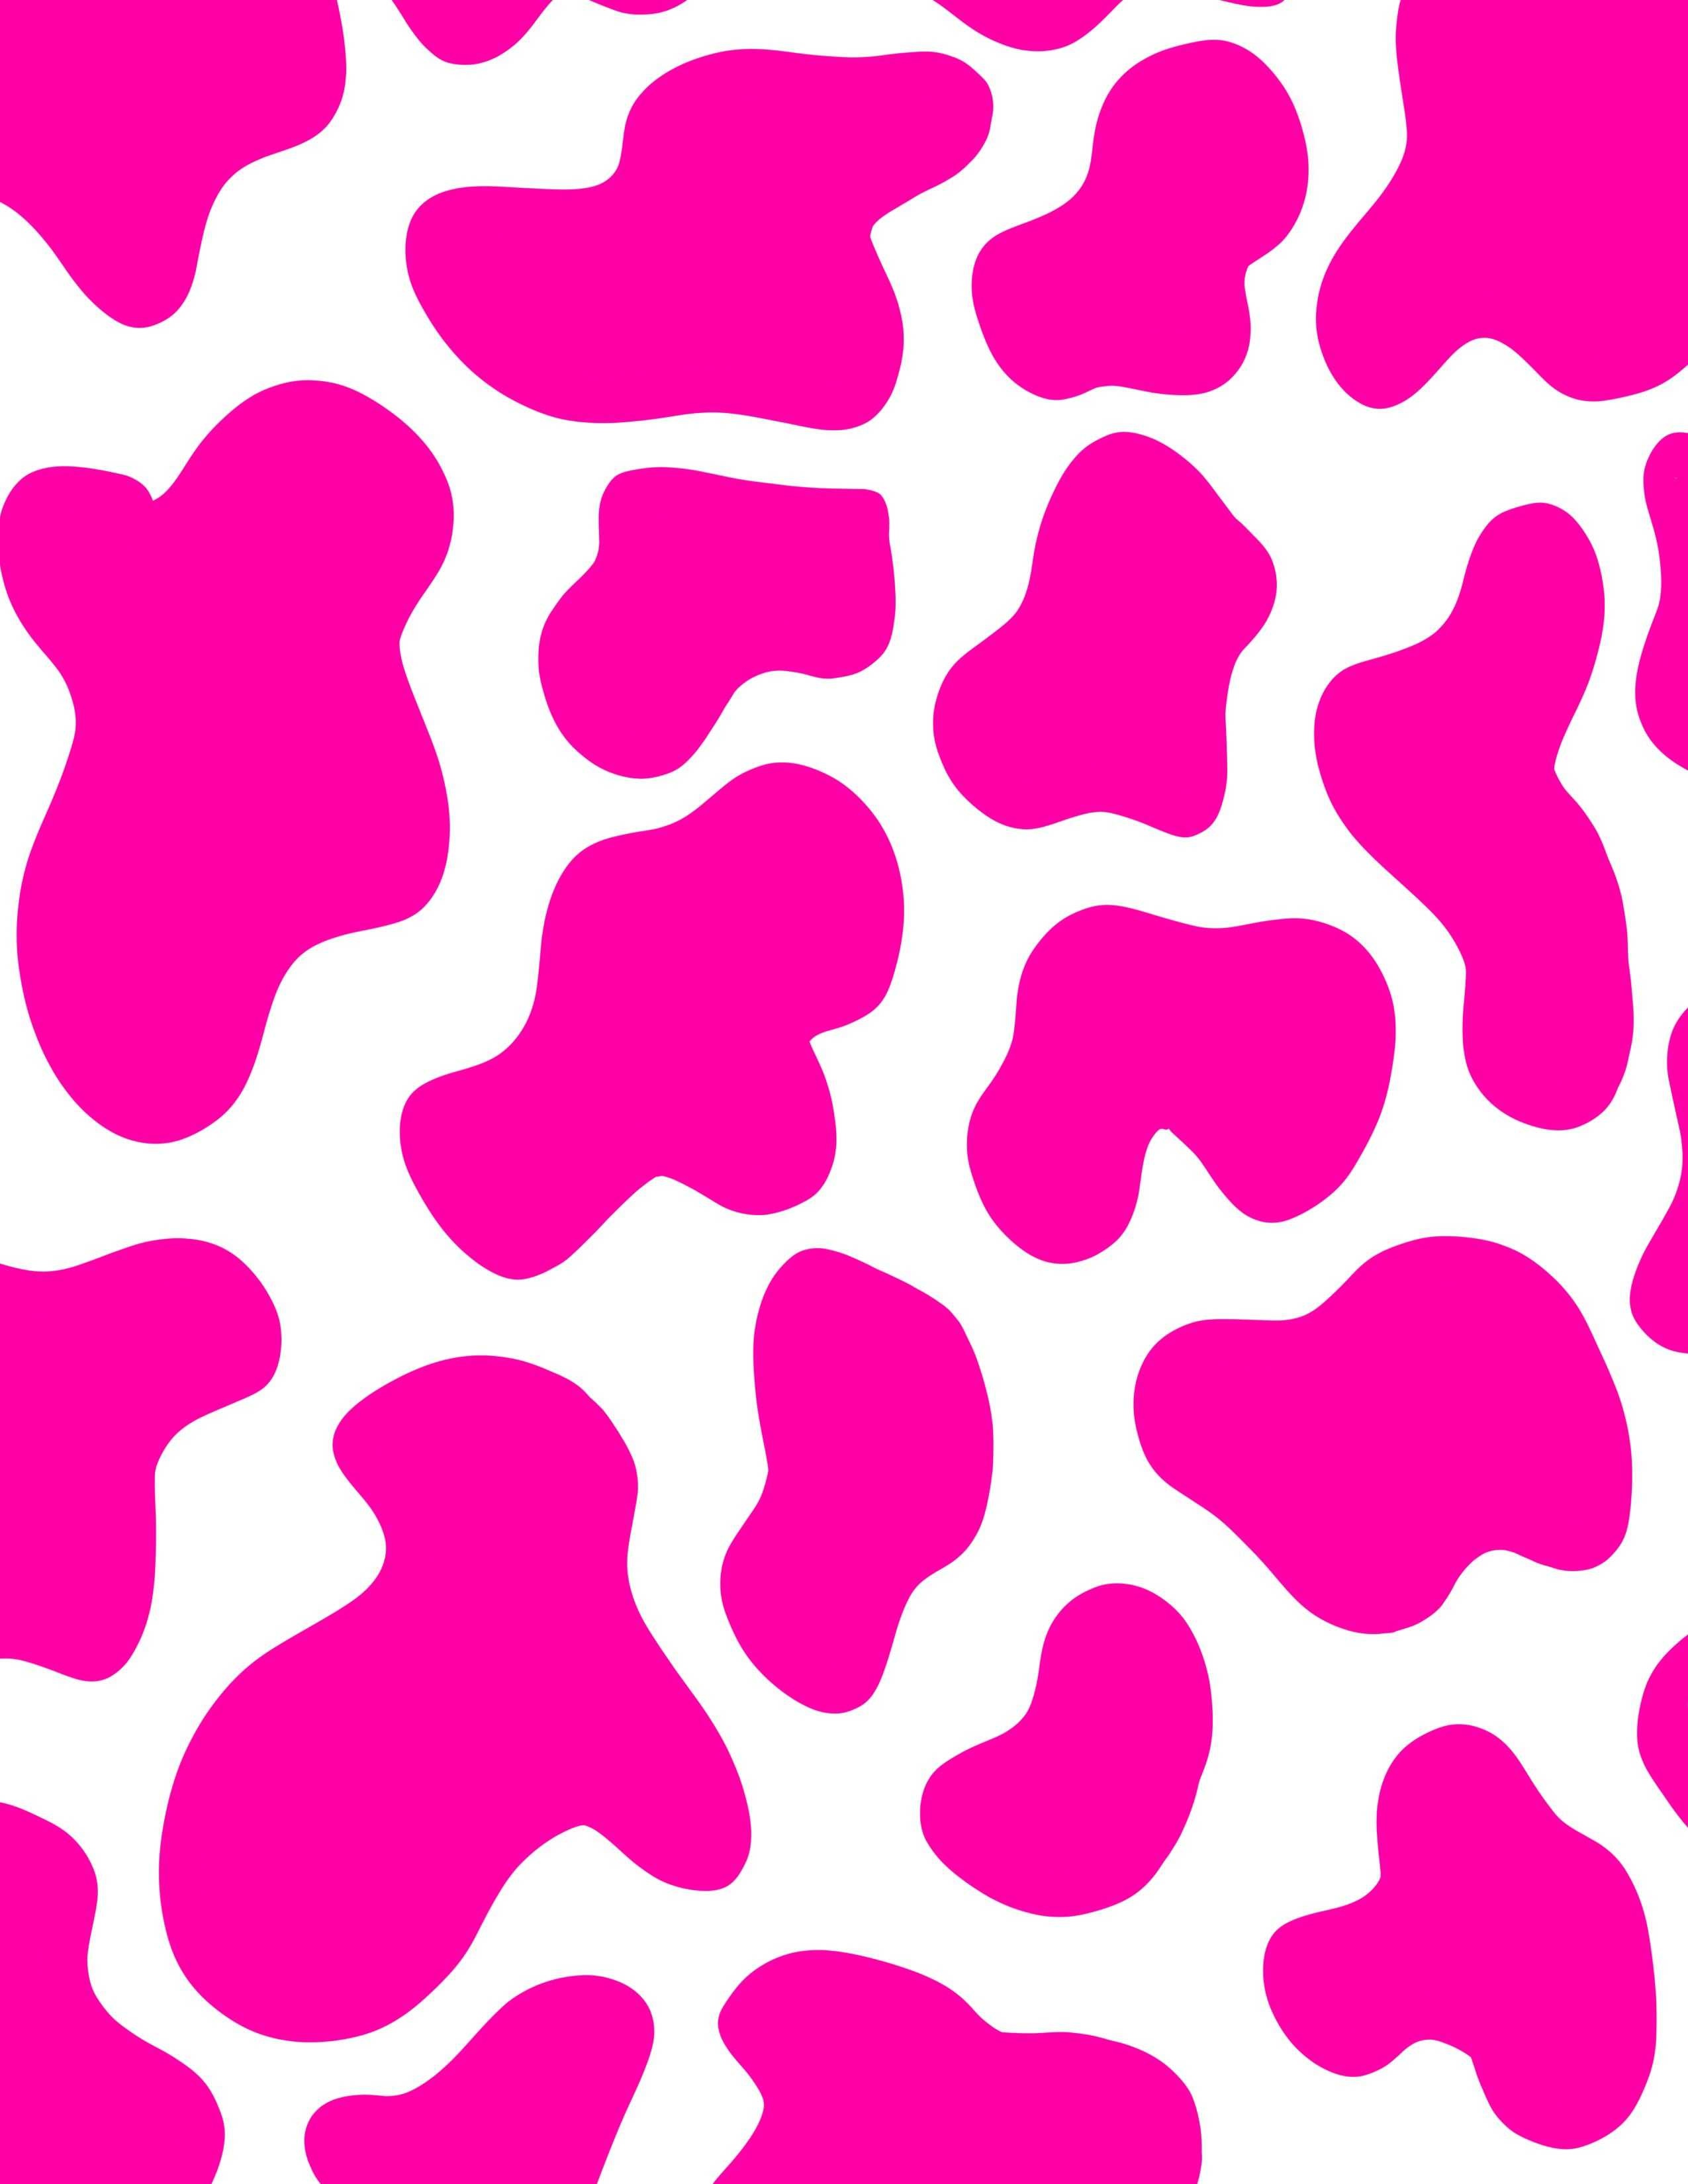 A pink and white cow pattern - Cow